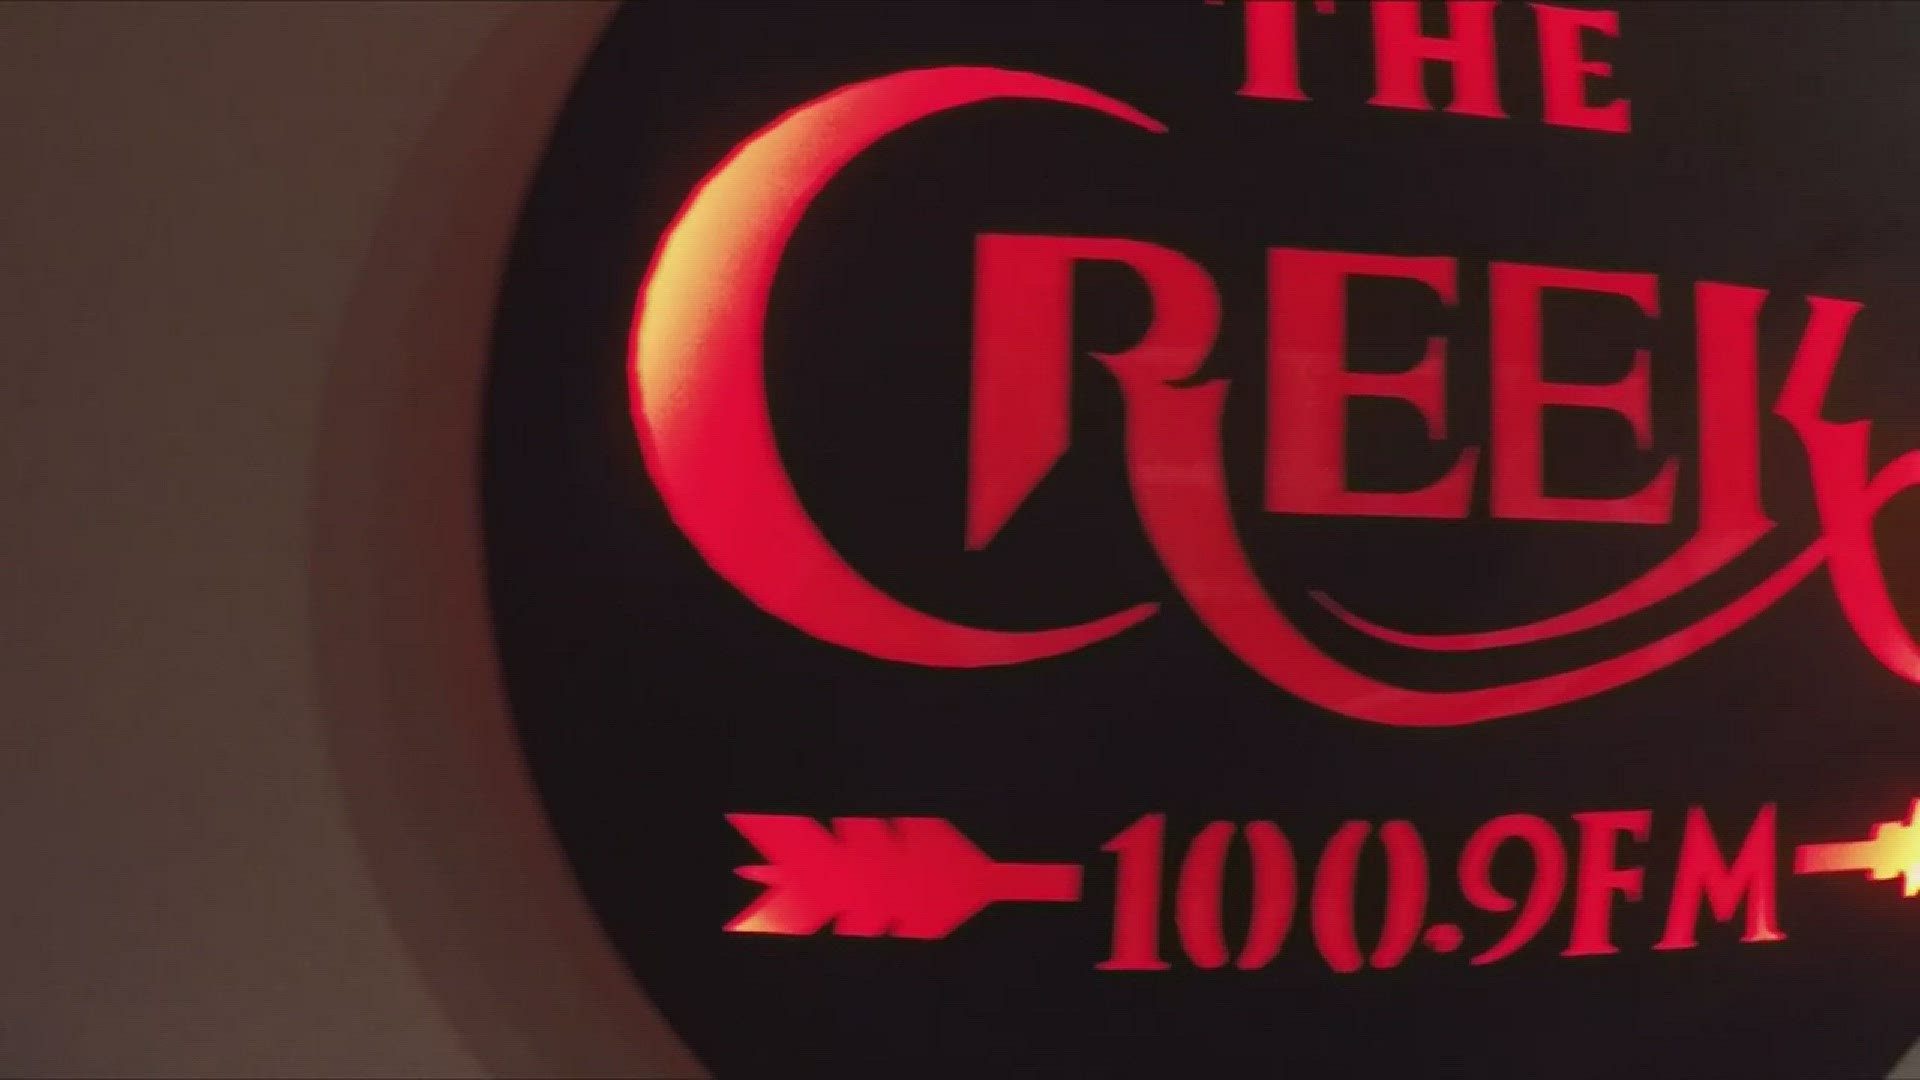 Scene 13 with 100.9 The Creek: September 1-3